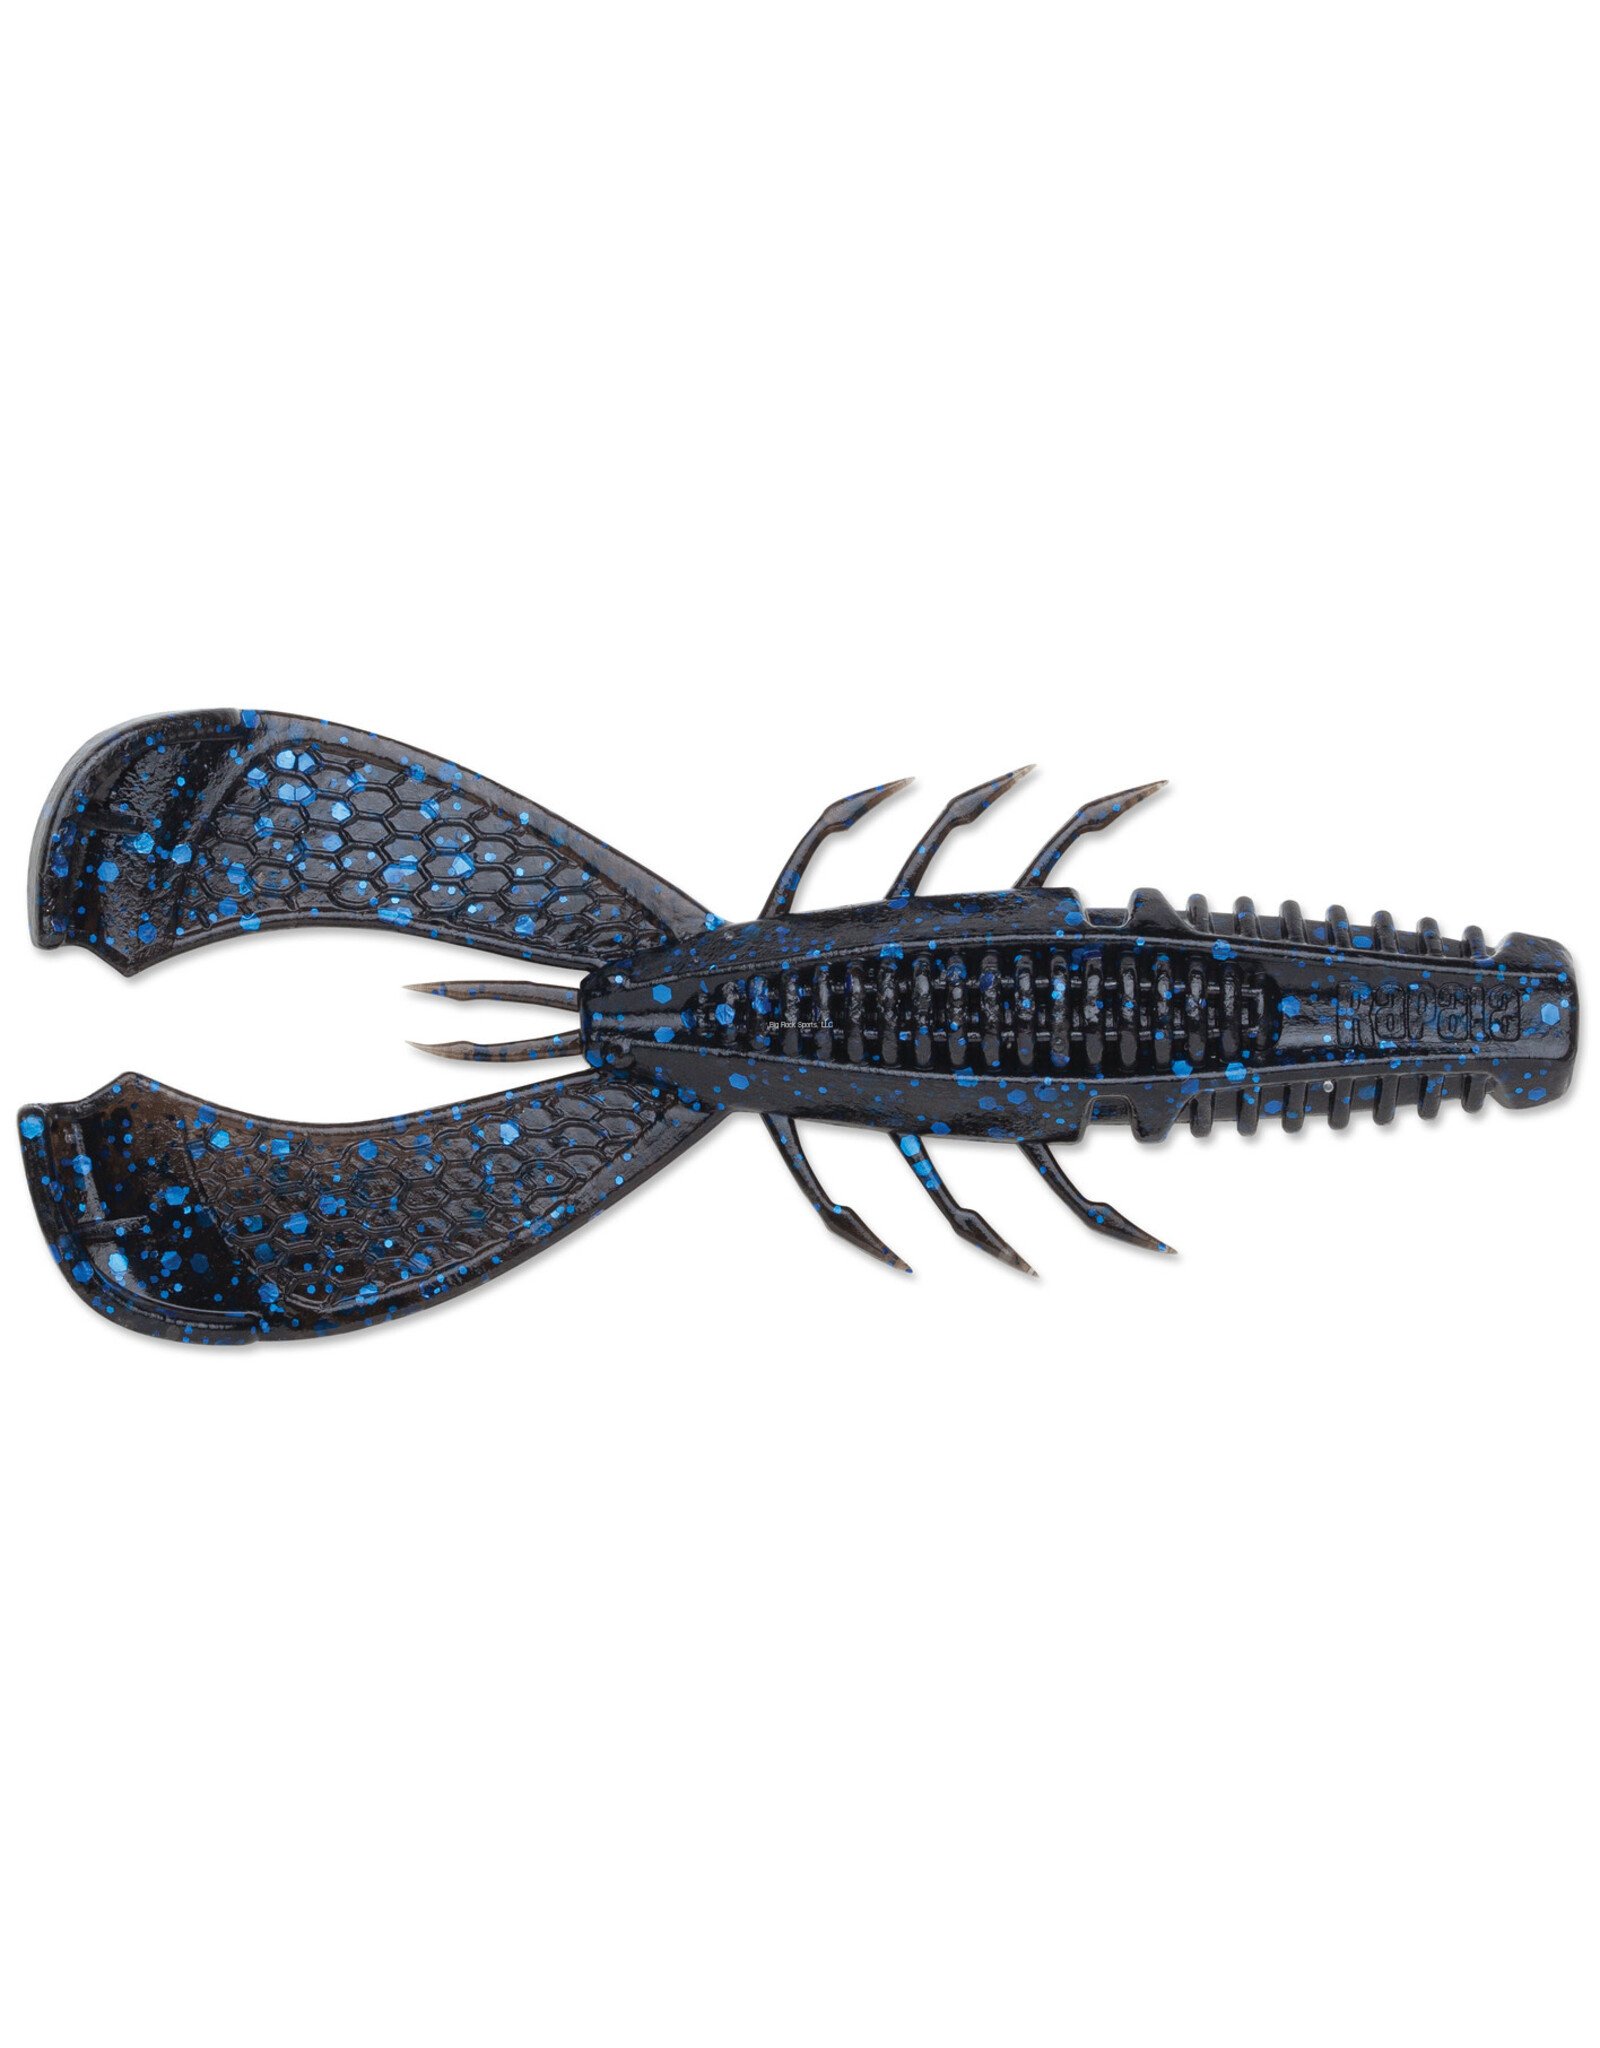 Rapala Rapala CCCLC35BKB CrushCity Cleanup Craw, 3.5", Salt/Scent Infused, 7 Per Package, Black Blue Flake